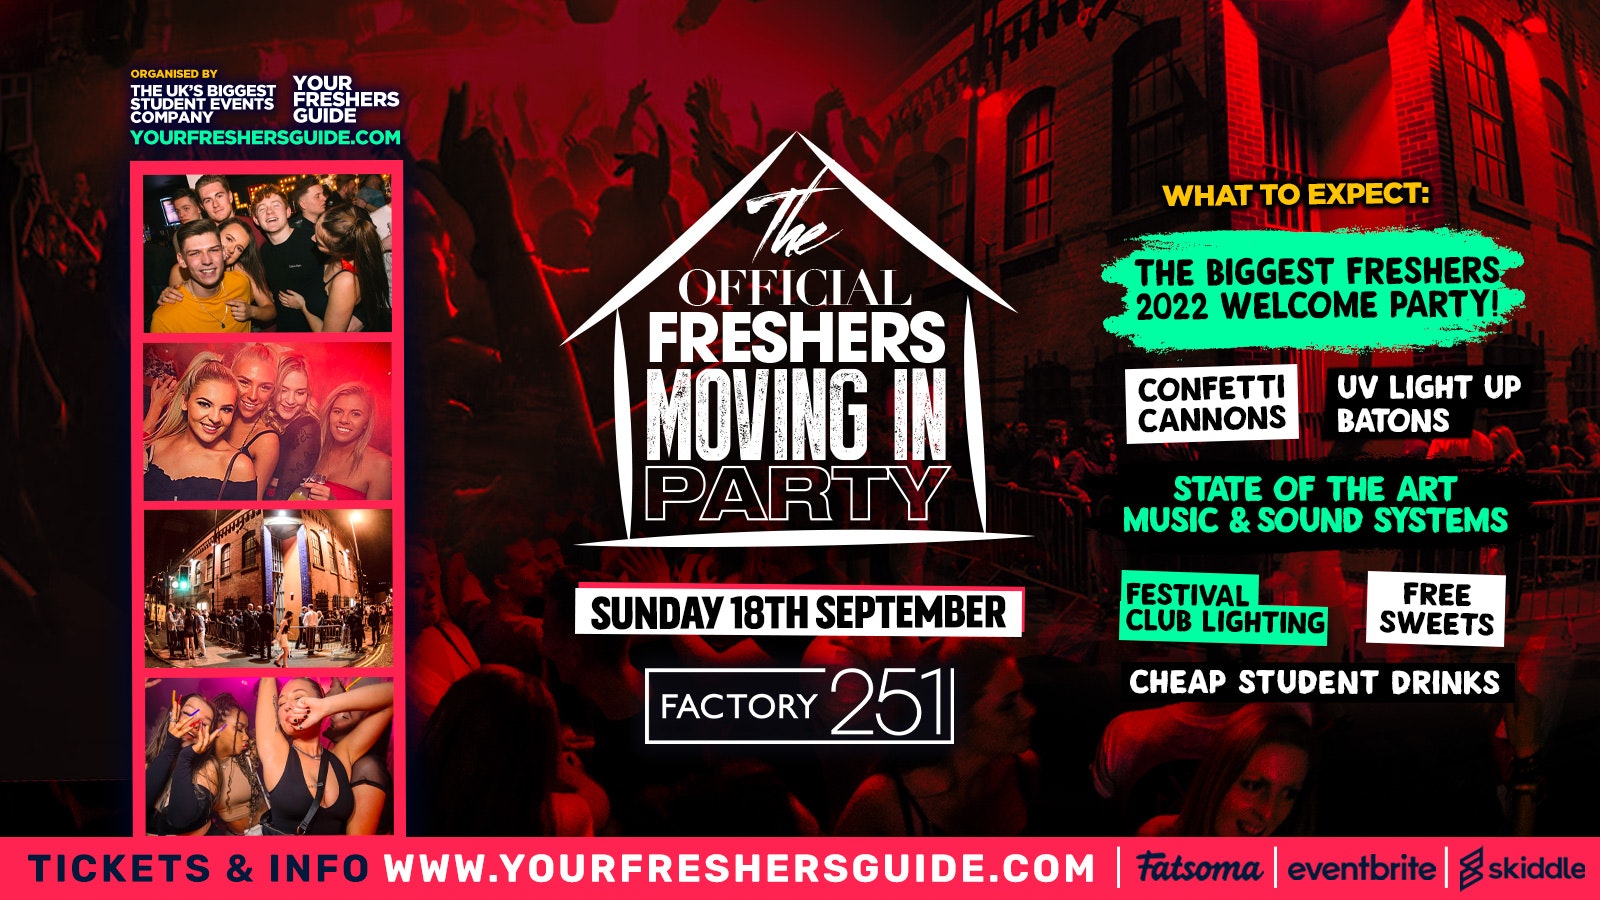 The Freshers Moving in Party @ FAC251 | Manchester Freshers 2022